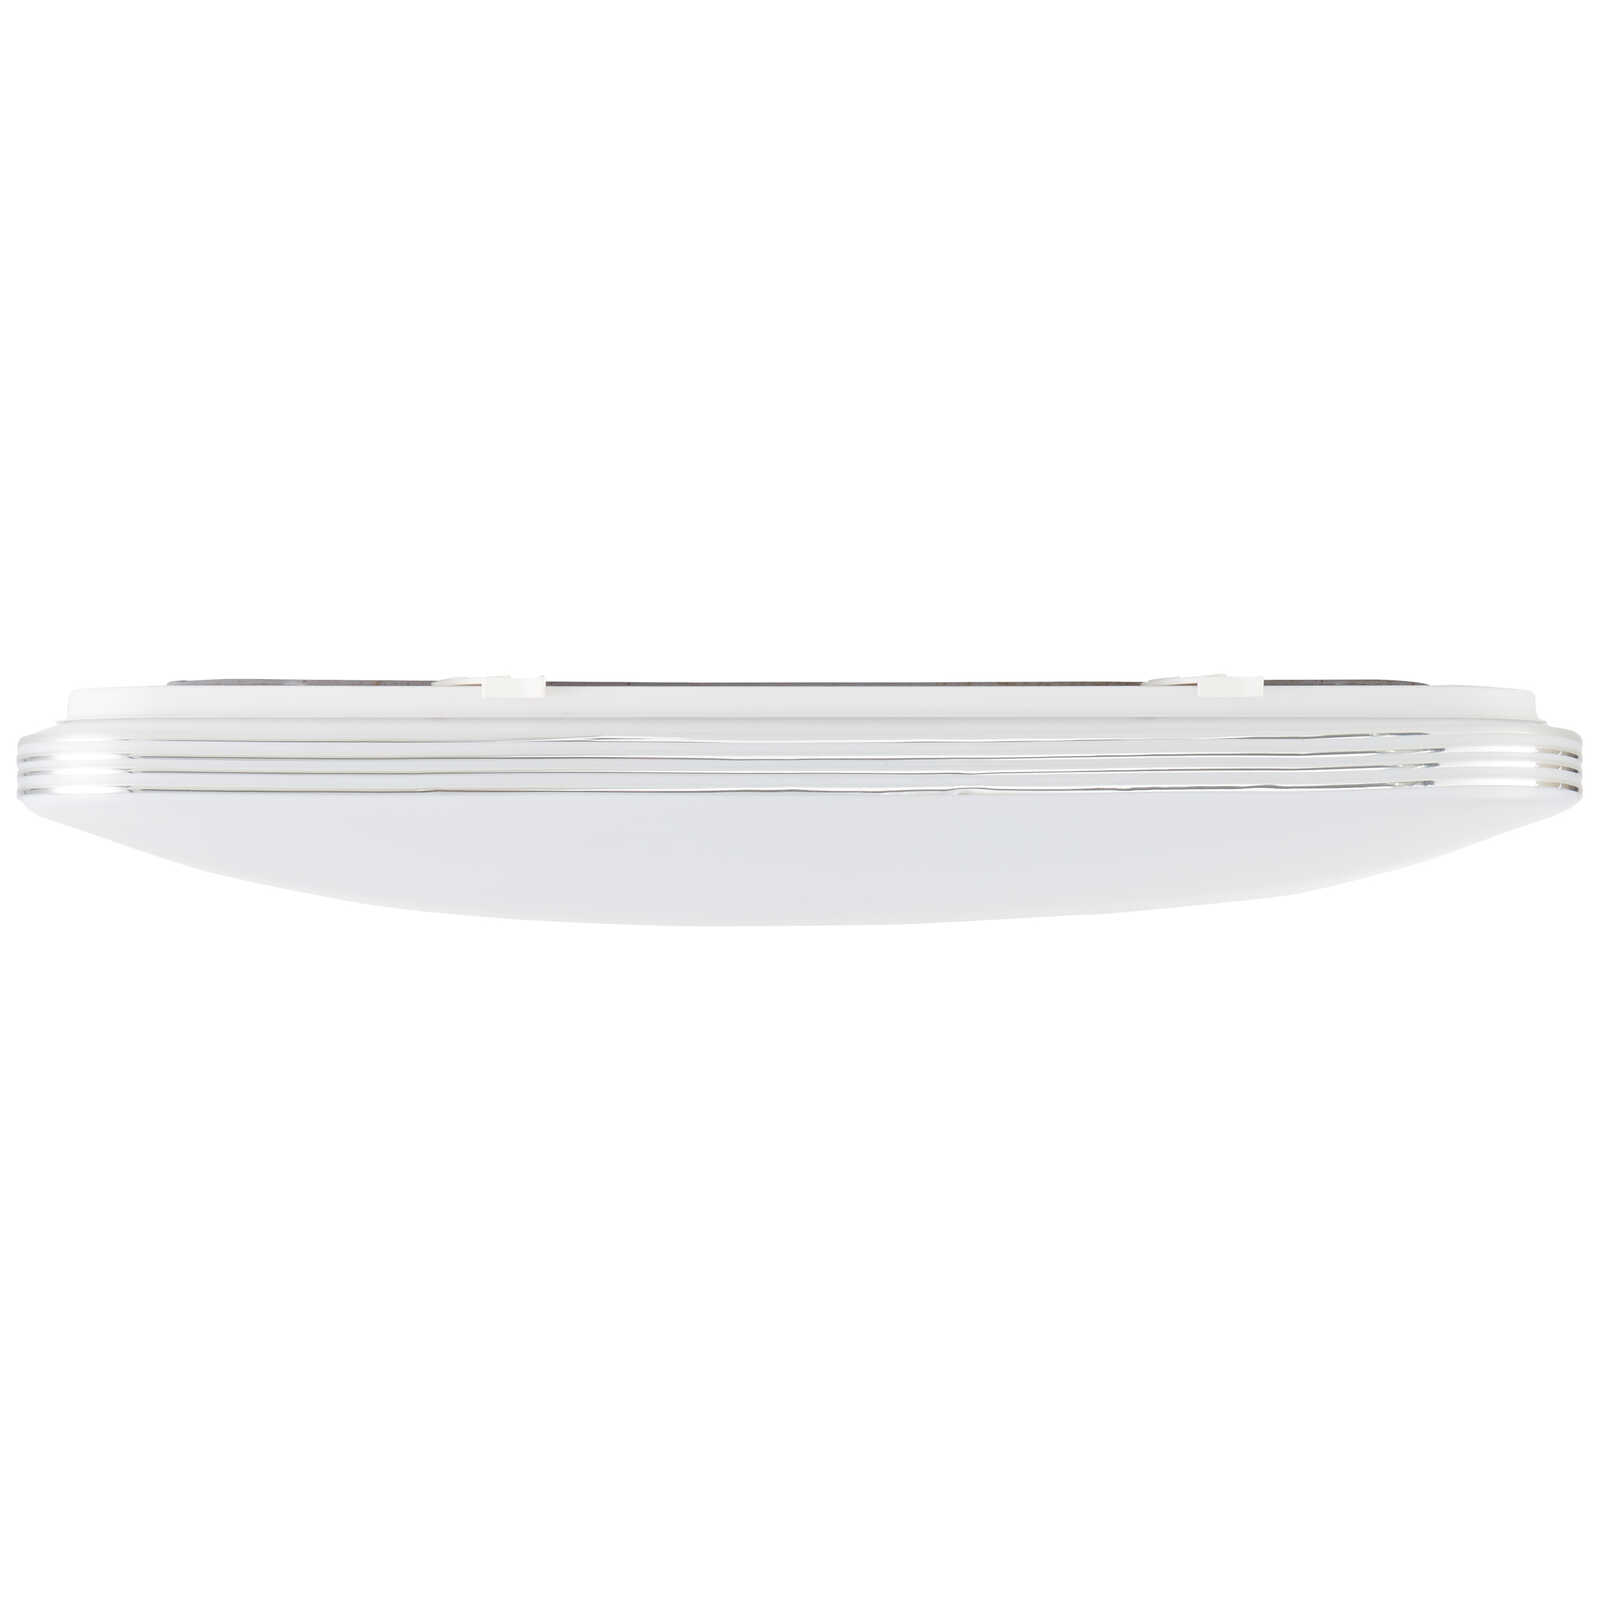             Plastic wall and ceiling light - Amelie - silver, white
        